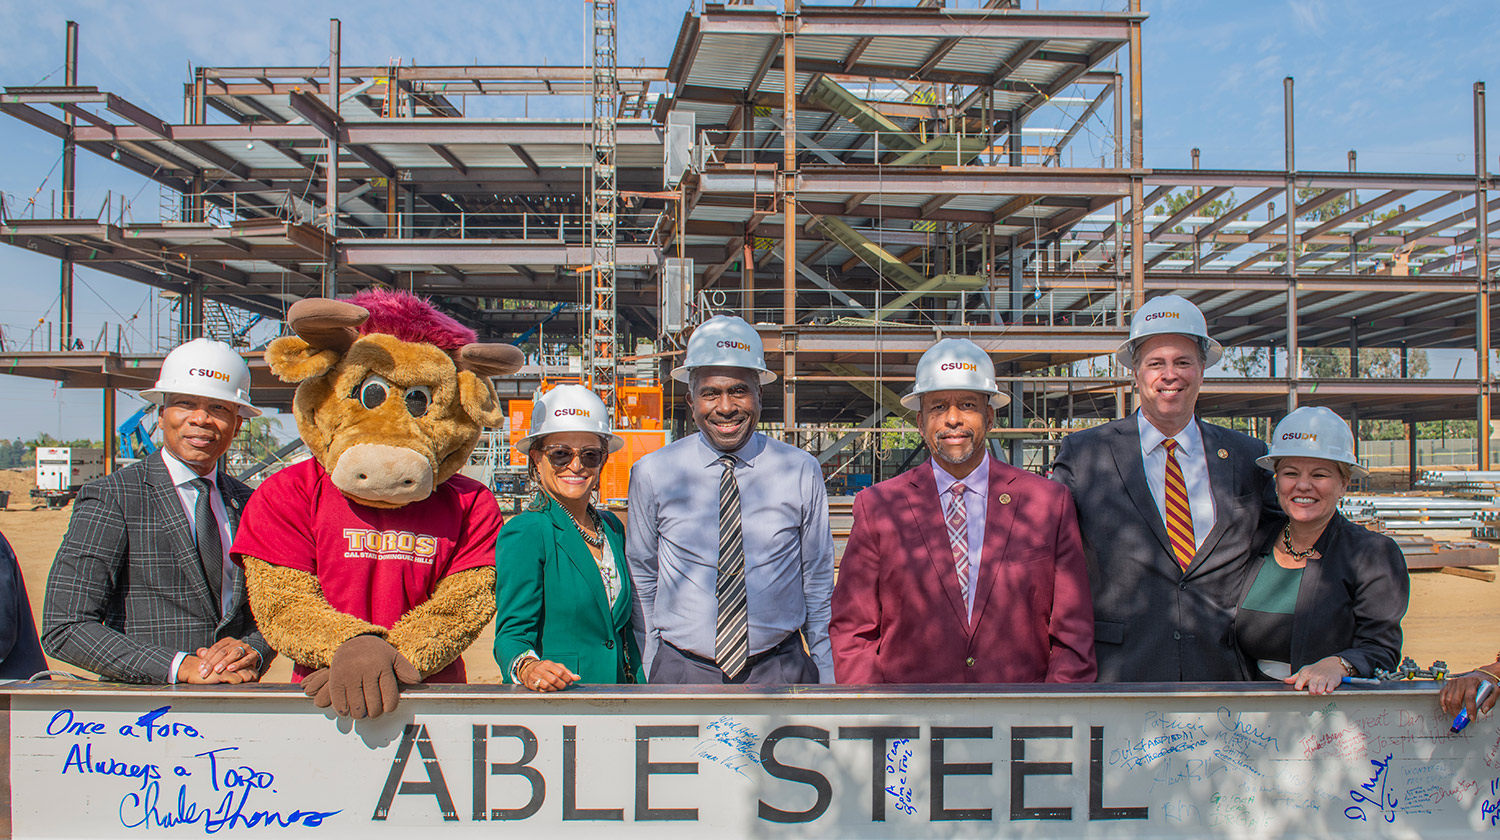 (Left to Right): VP for Student Affairs William Franklin, Teddy the Toro, president's Chief of Staff Deborah Roberson-Simms,Interim VP of Administration and Finance Ron Coley, CSUDH President Thomas A. Parham, VP for Student Affairs Michael Spagna, and VP for University Advancement Carrie Stewart. 